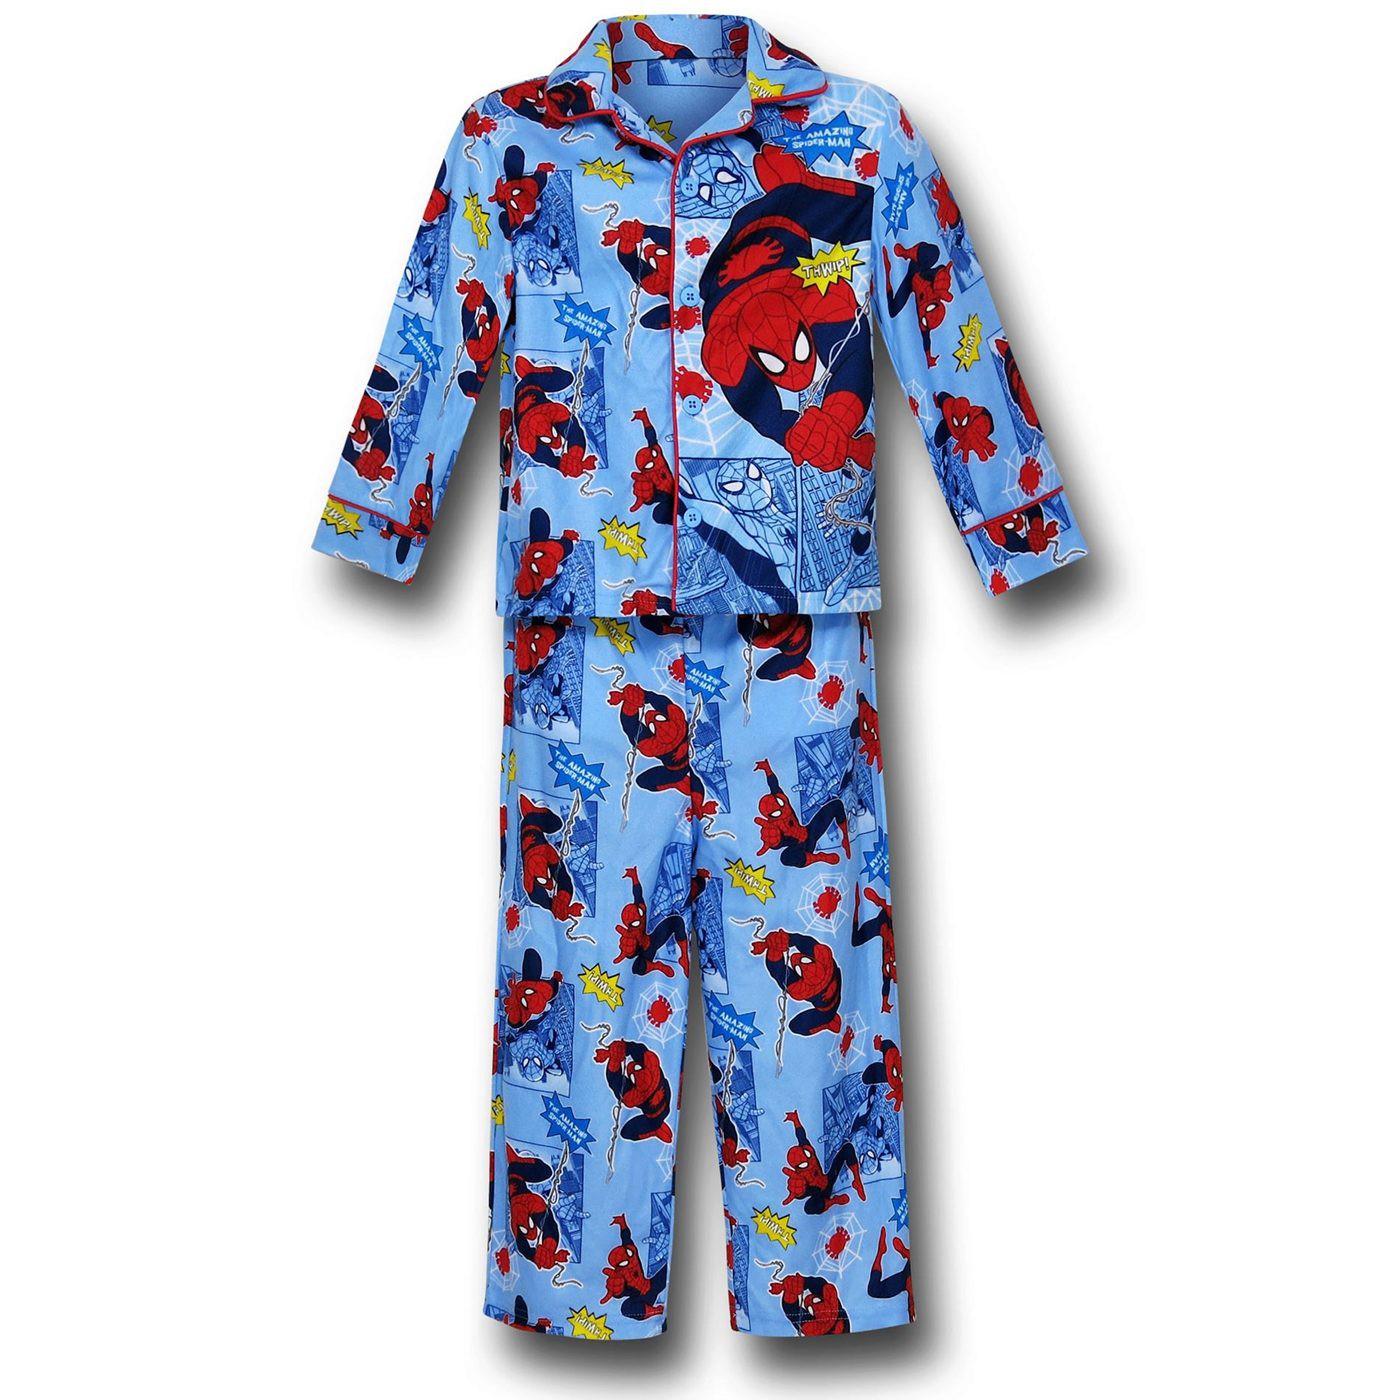 childrens red button shirt and pj bottoms